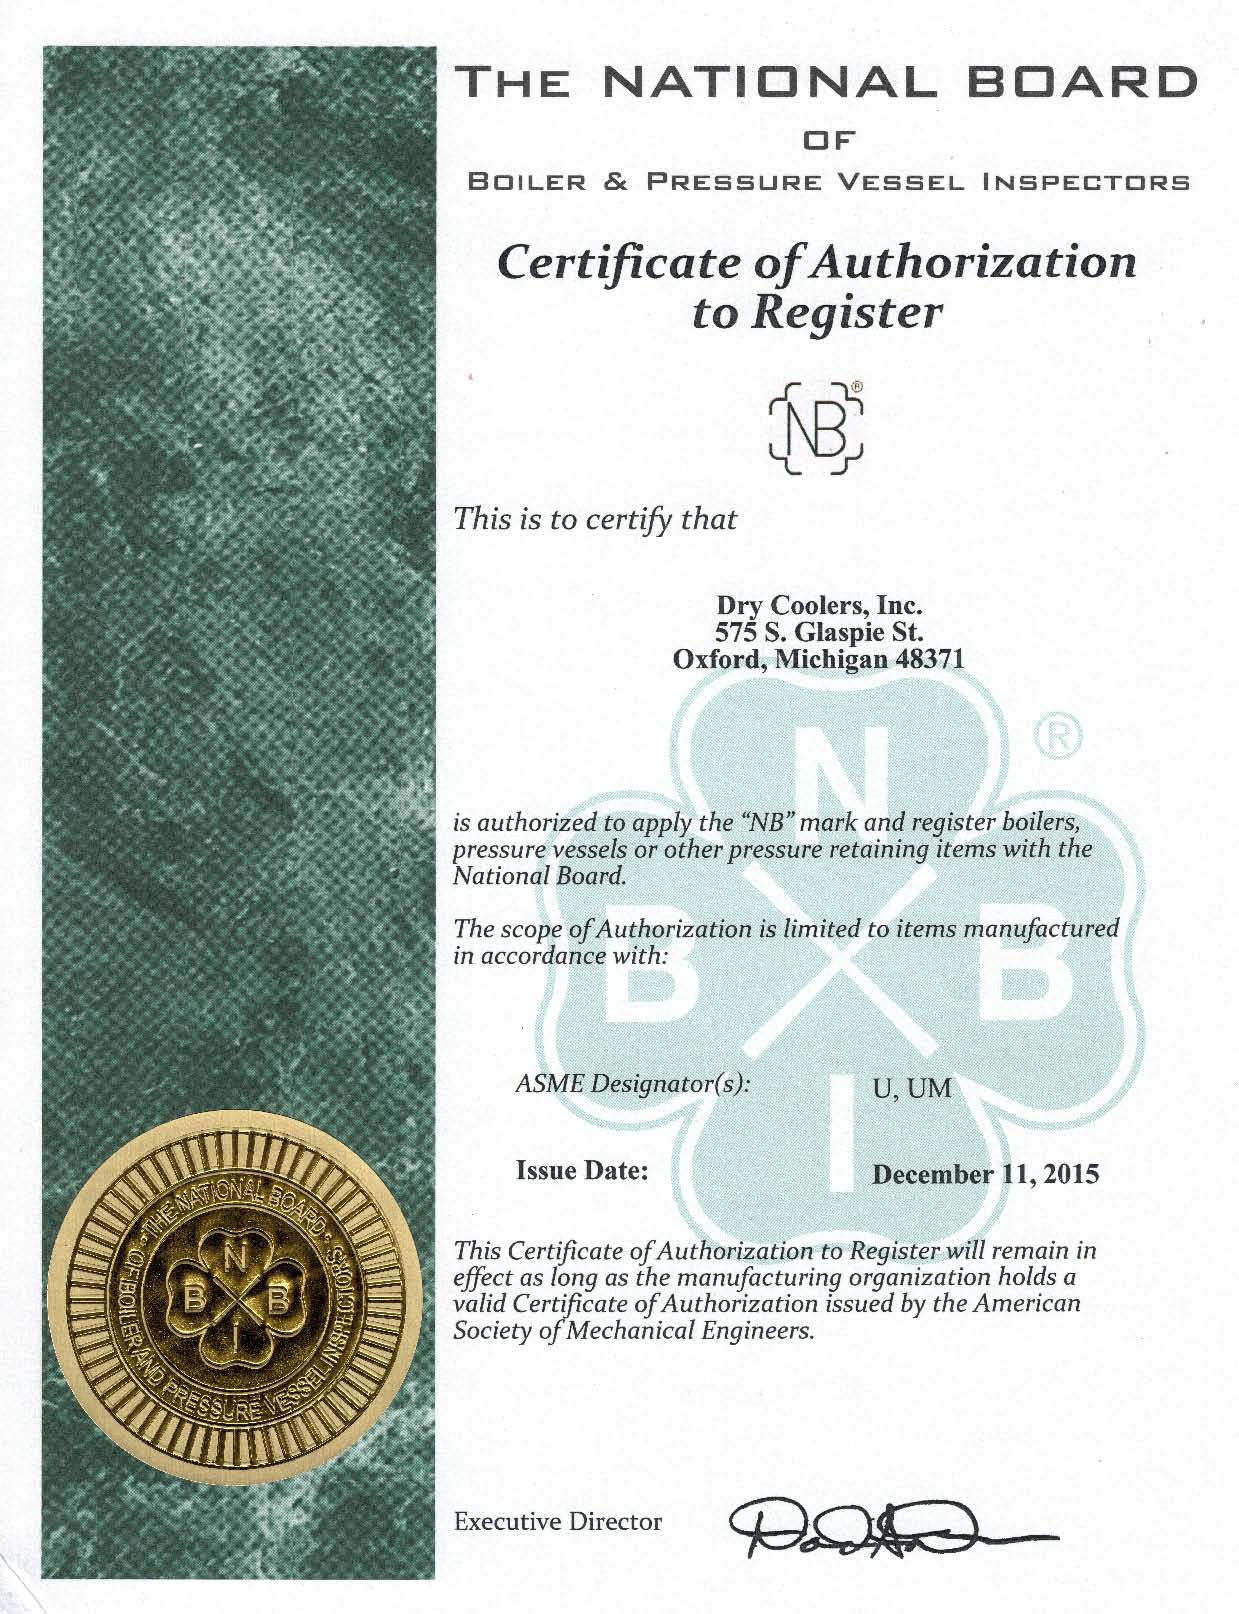 National Board Certificate of Authorization